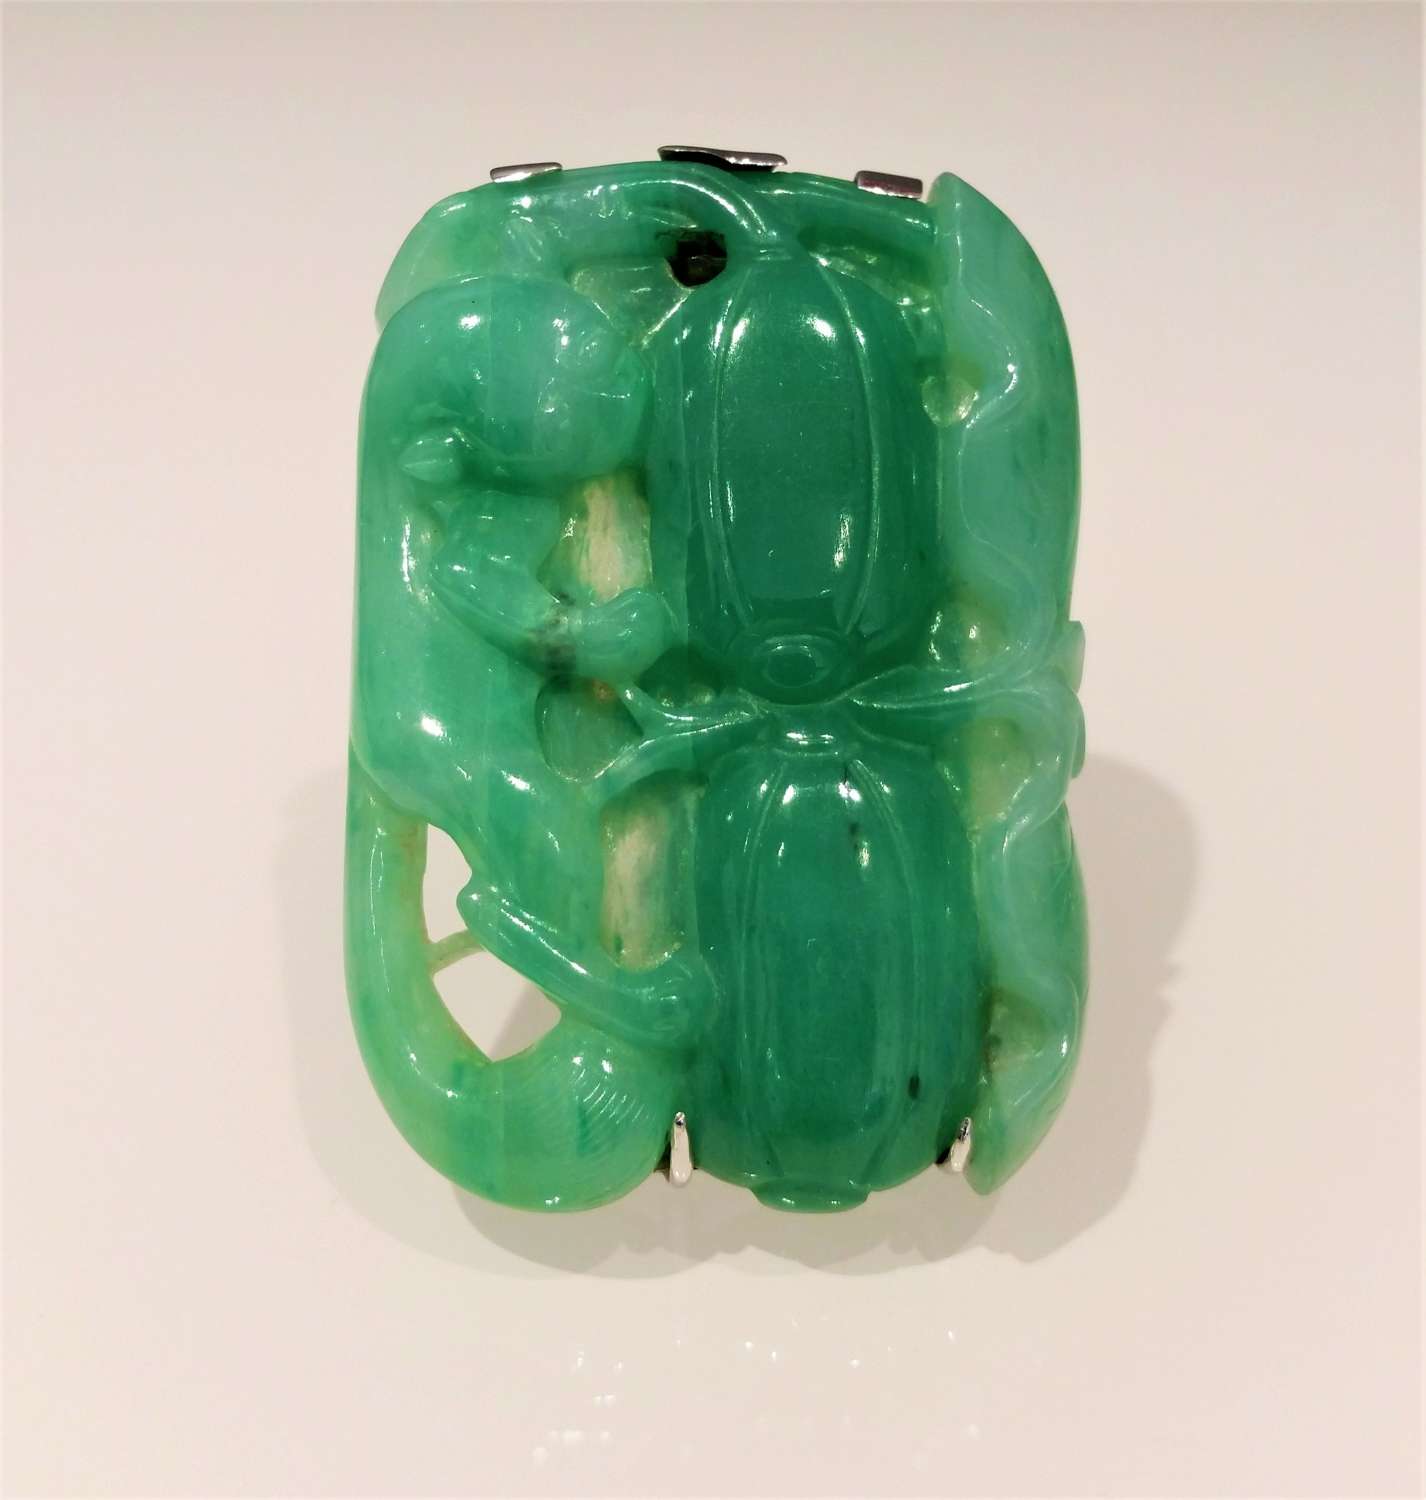 Chinese carved jade brooch mounted as a clip brooch